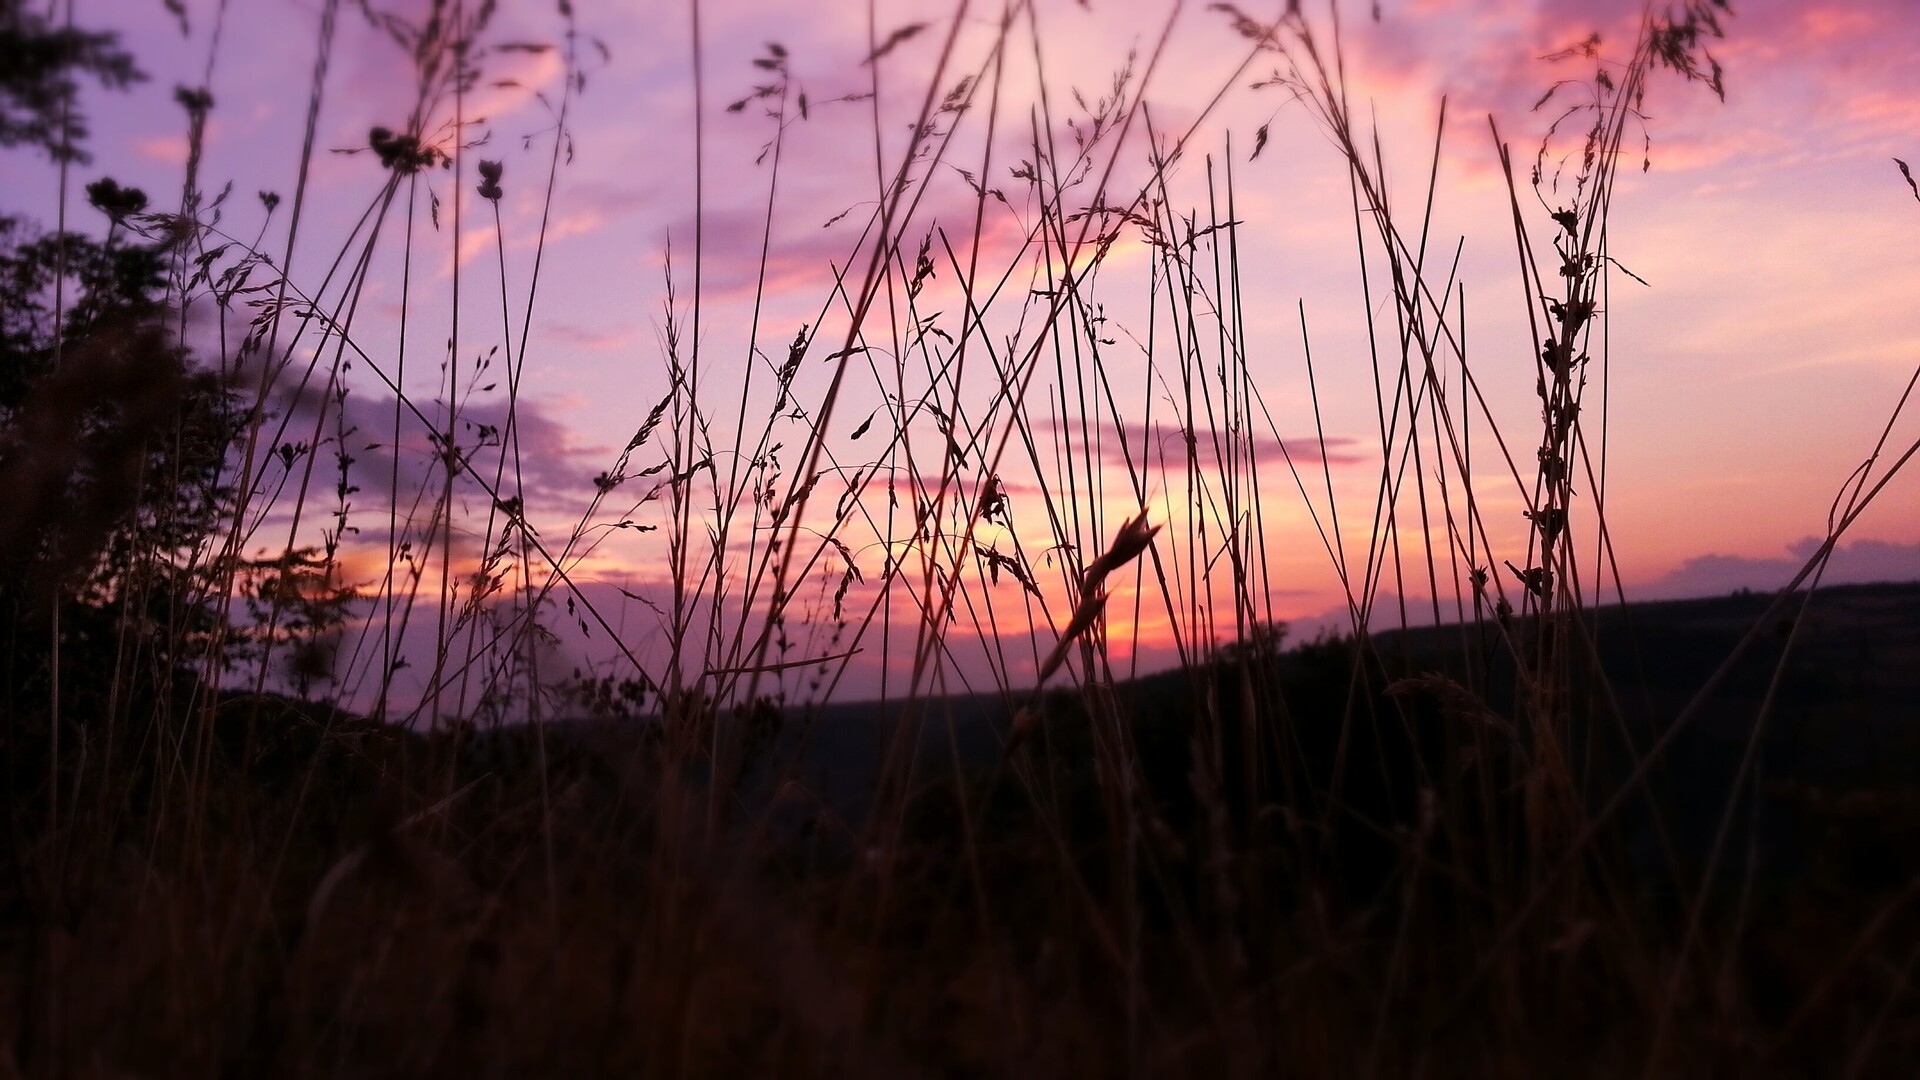 A sunset with grass and trees in the foreground - Sky